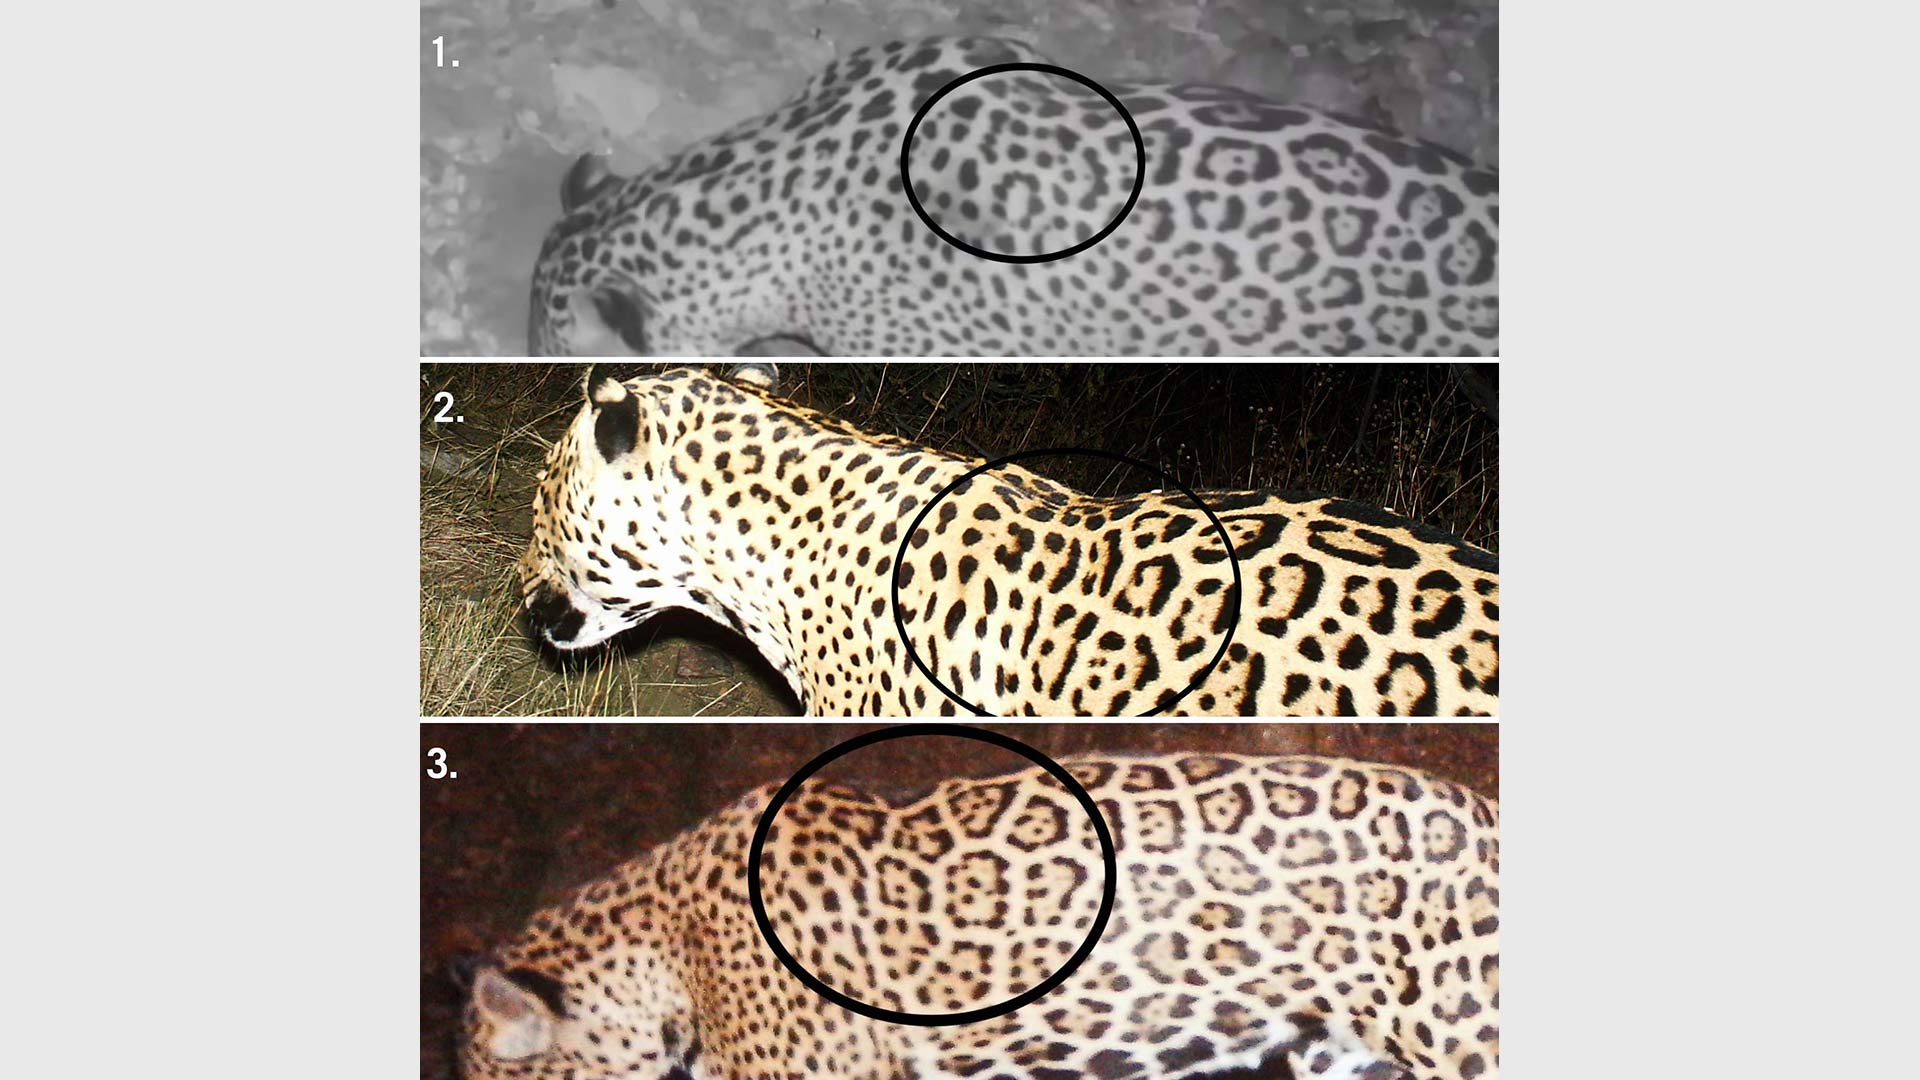 Based on rosette or spot analysis conducted by the Center Biological Diversity, a new jaguar has been detected in southern Arizona. From top to bottom is the new cat, Sombra and El Jefe. 